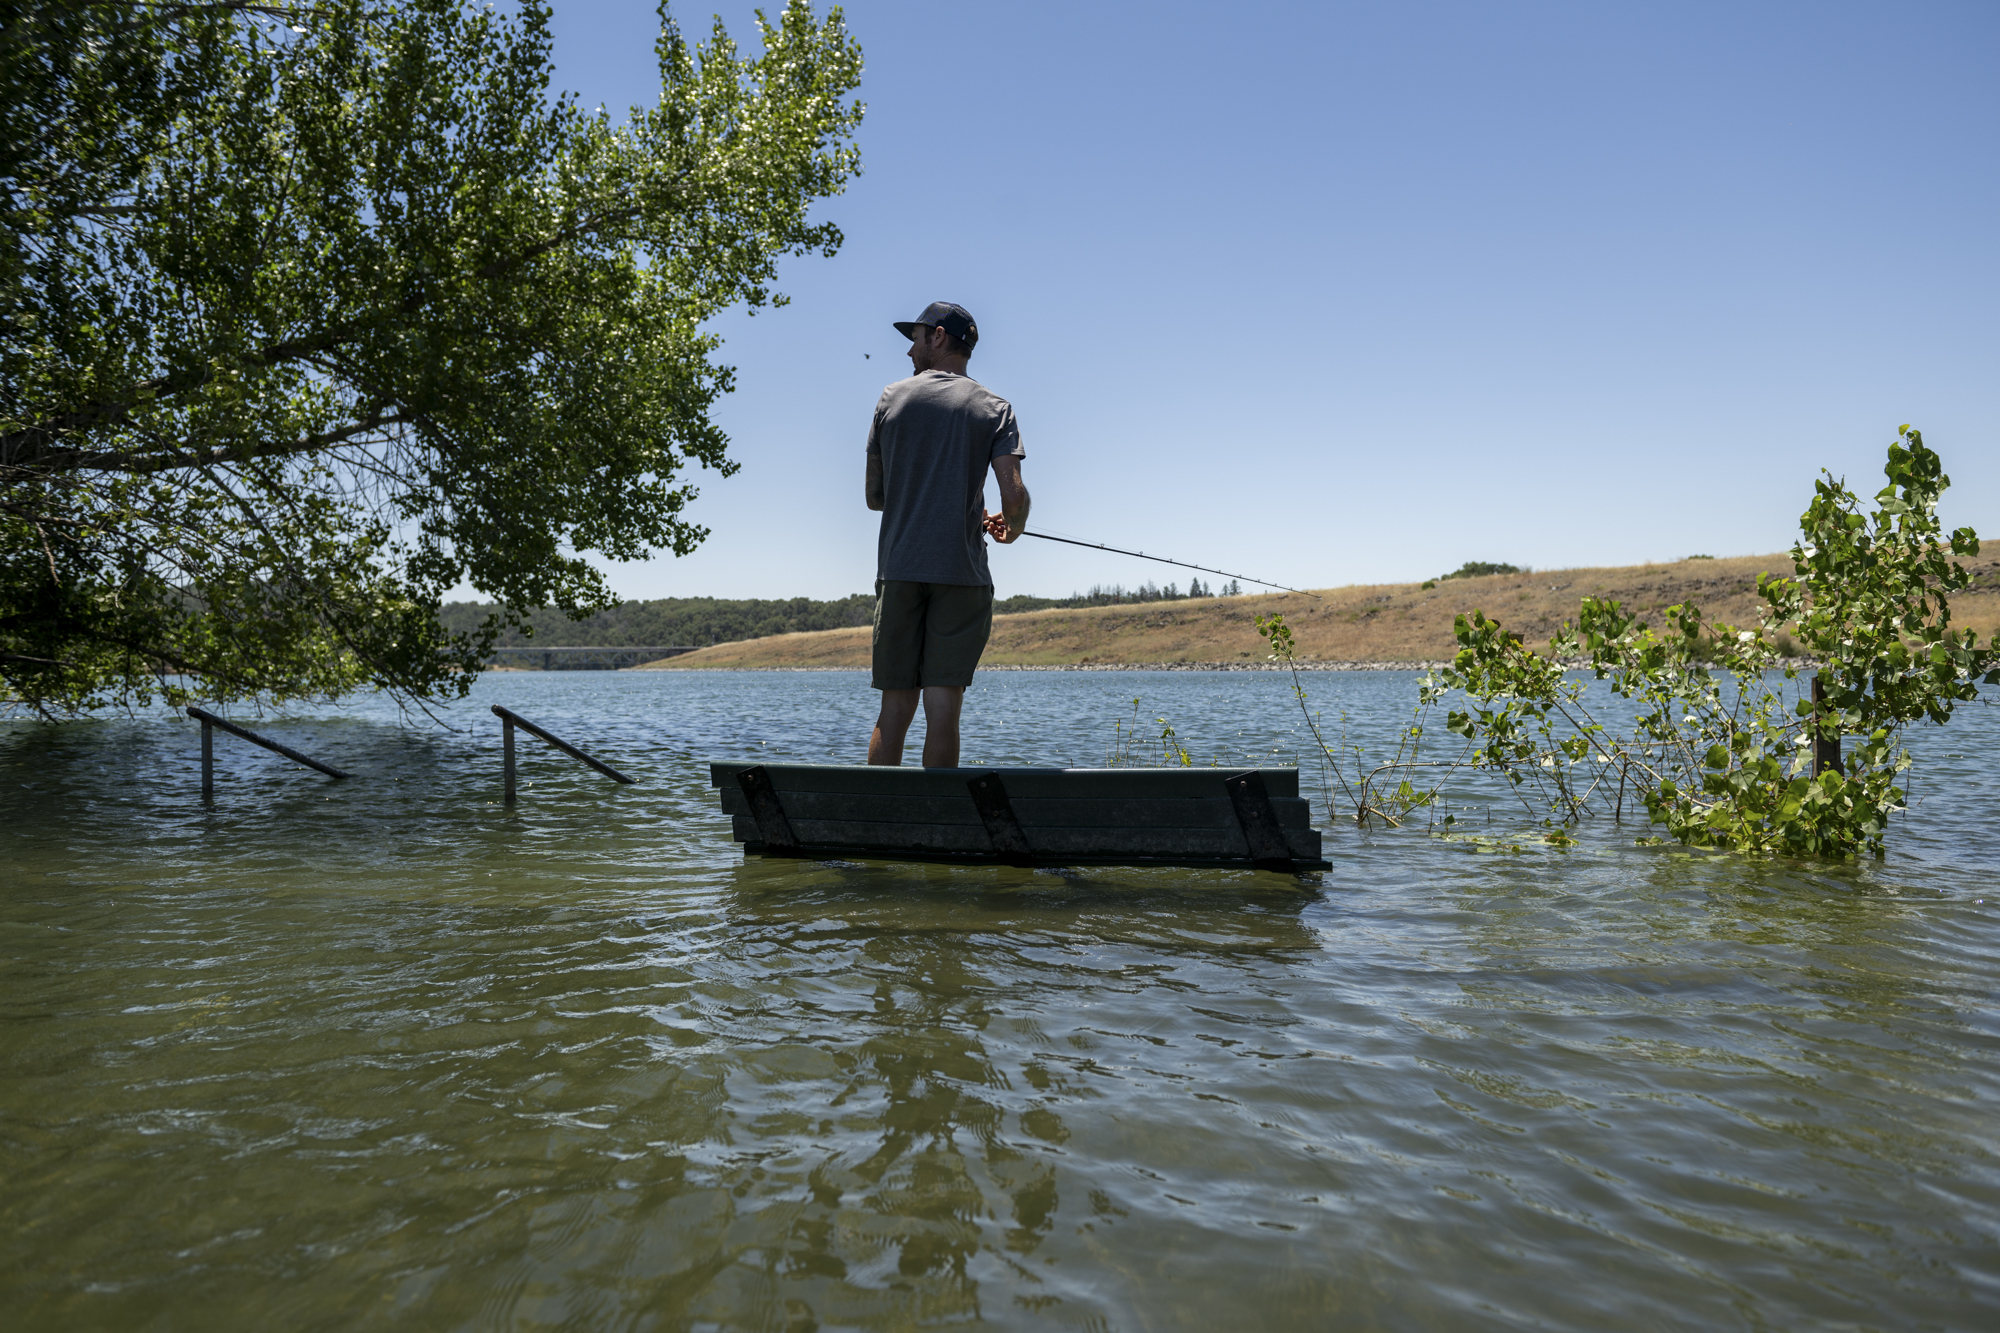 A person wearing a baseball cap wades into water holding a fishing rod in their hands.